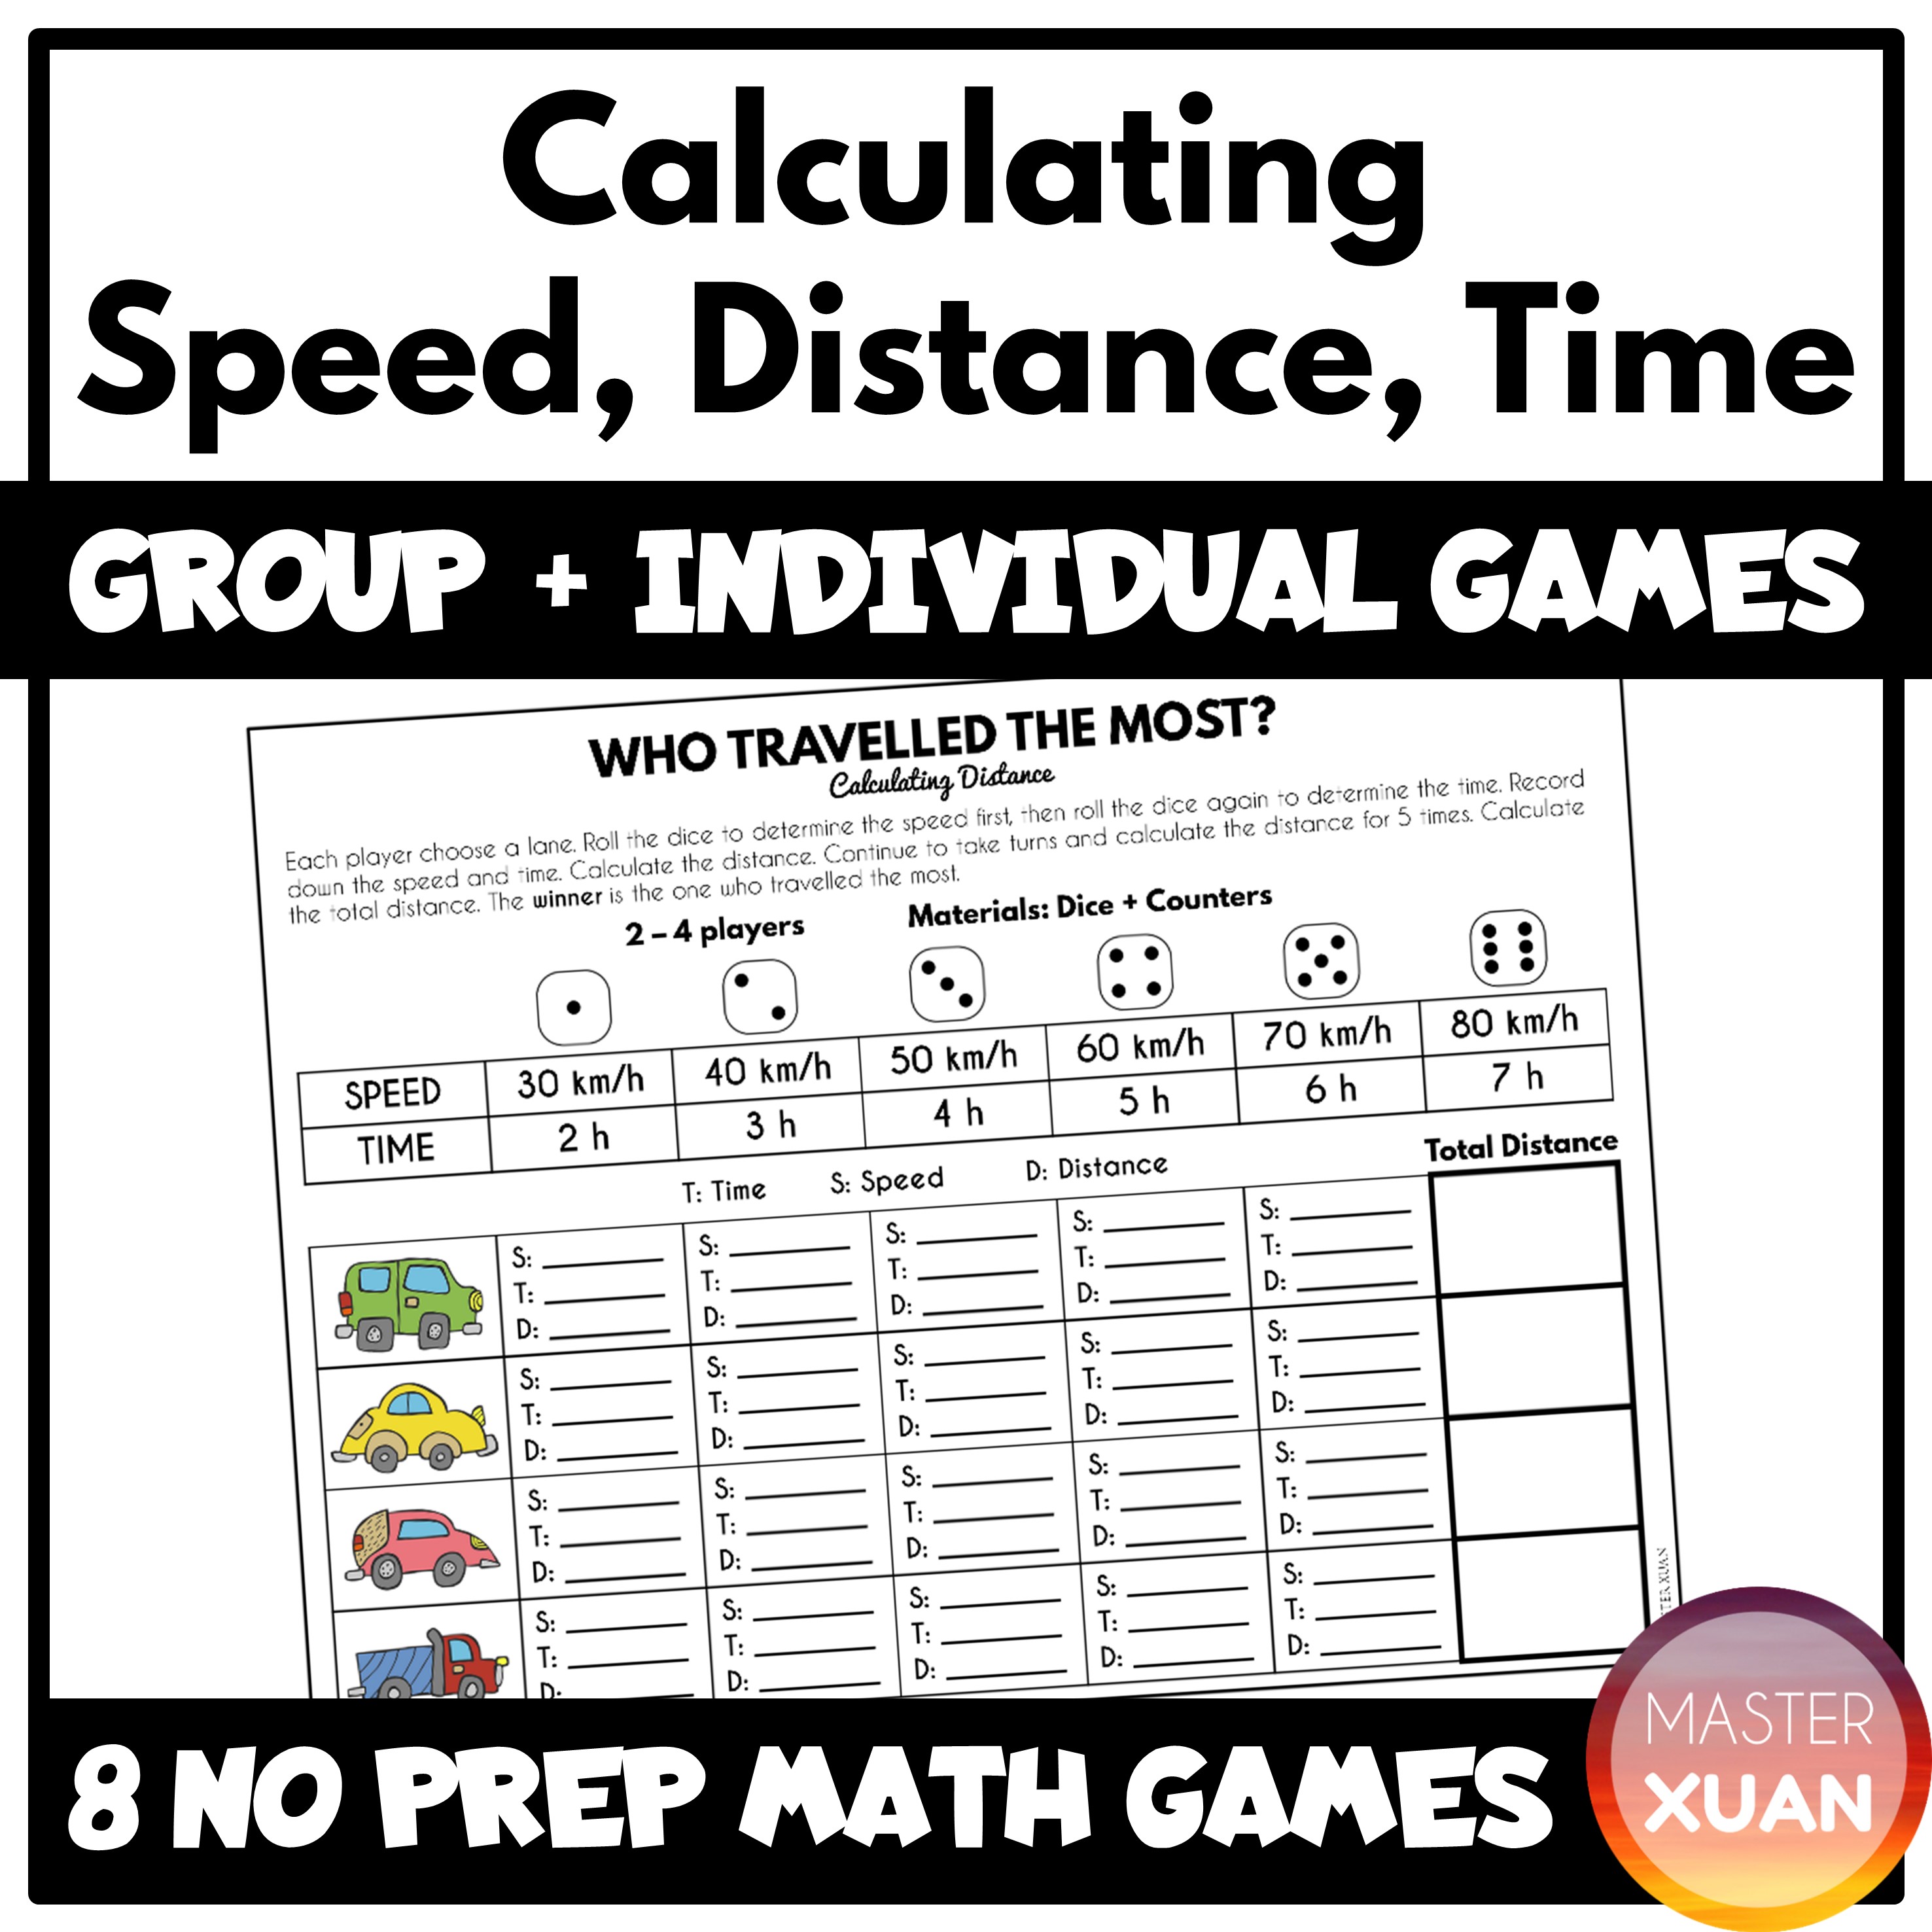 Calculating & Graphing Speed, Distance and Time (Google Classroom  compatible)